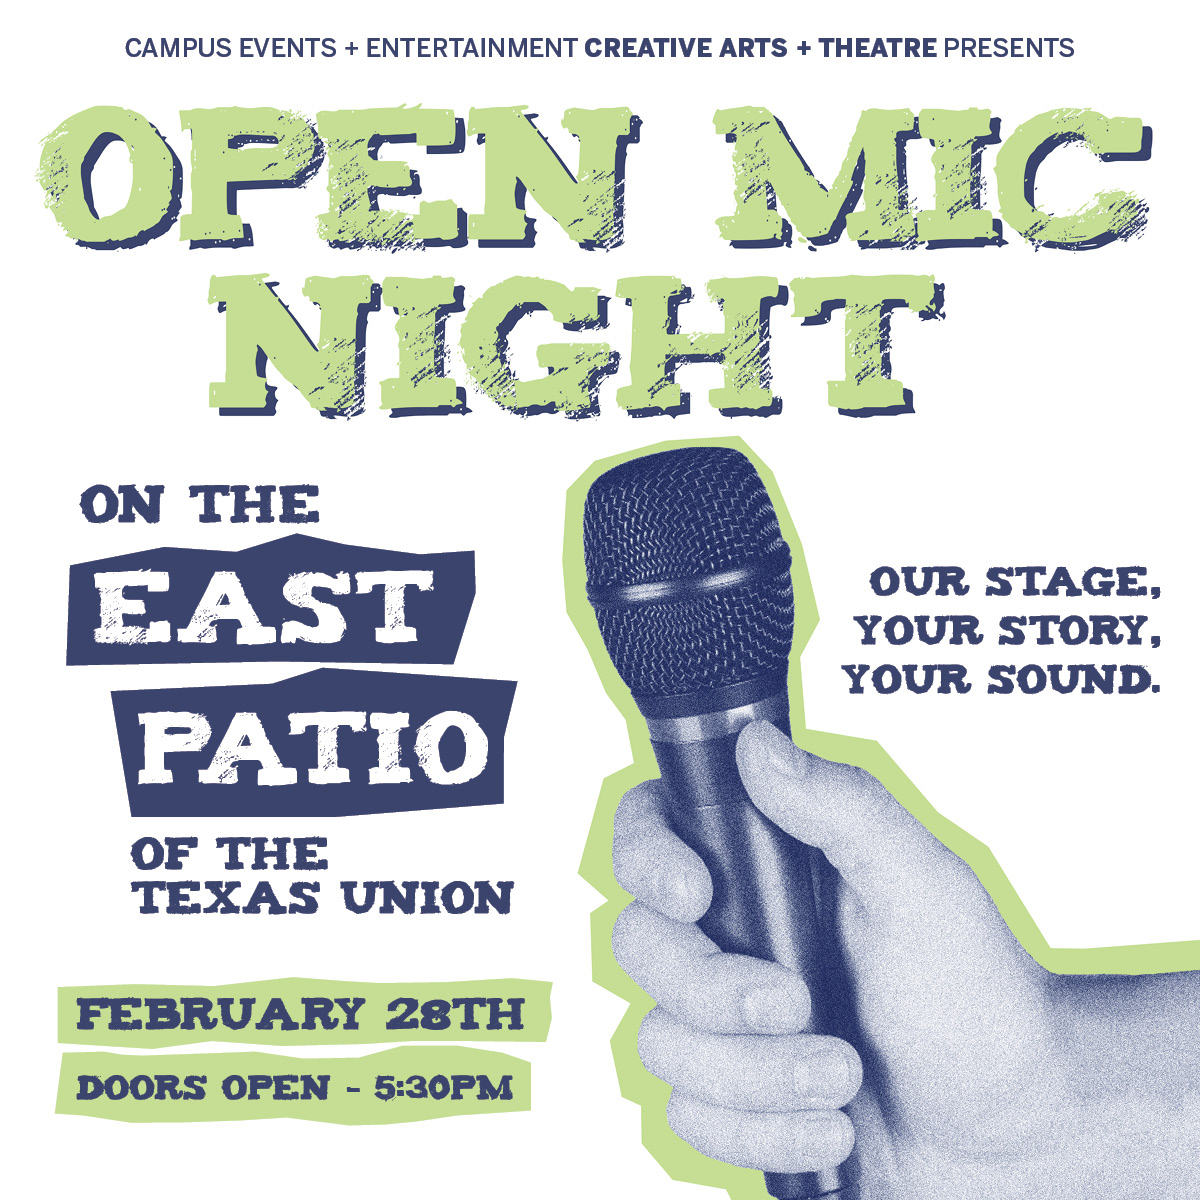 A flyer presenting Campus Events and Entertainemnt's Open Mic Night. Open Mic Night is in green lettering at the top. Underneath is a picture of a hand holding a microphone. In blue and white lettering, it says on the east patio of the texas union. on the other side it says our stage, your story, your sound. The date says February 28th and underneath that it says Doors open 5:30